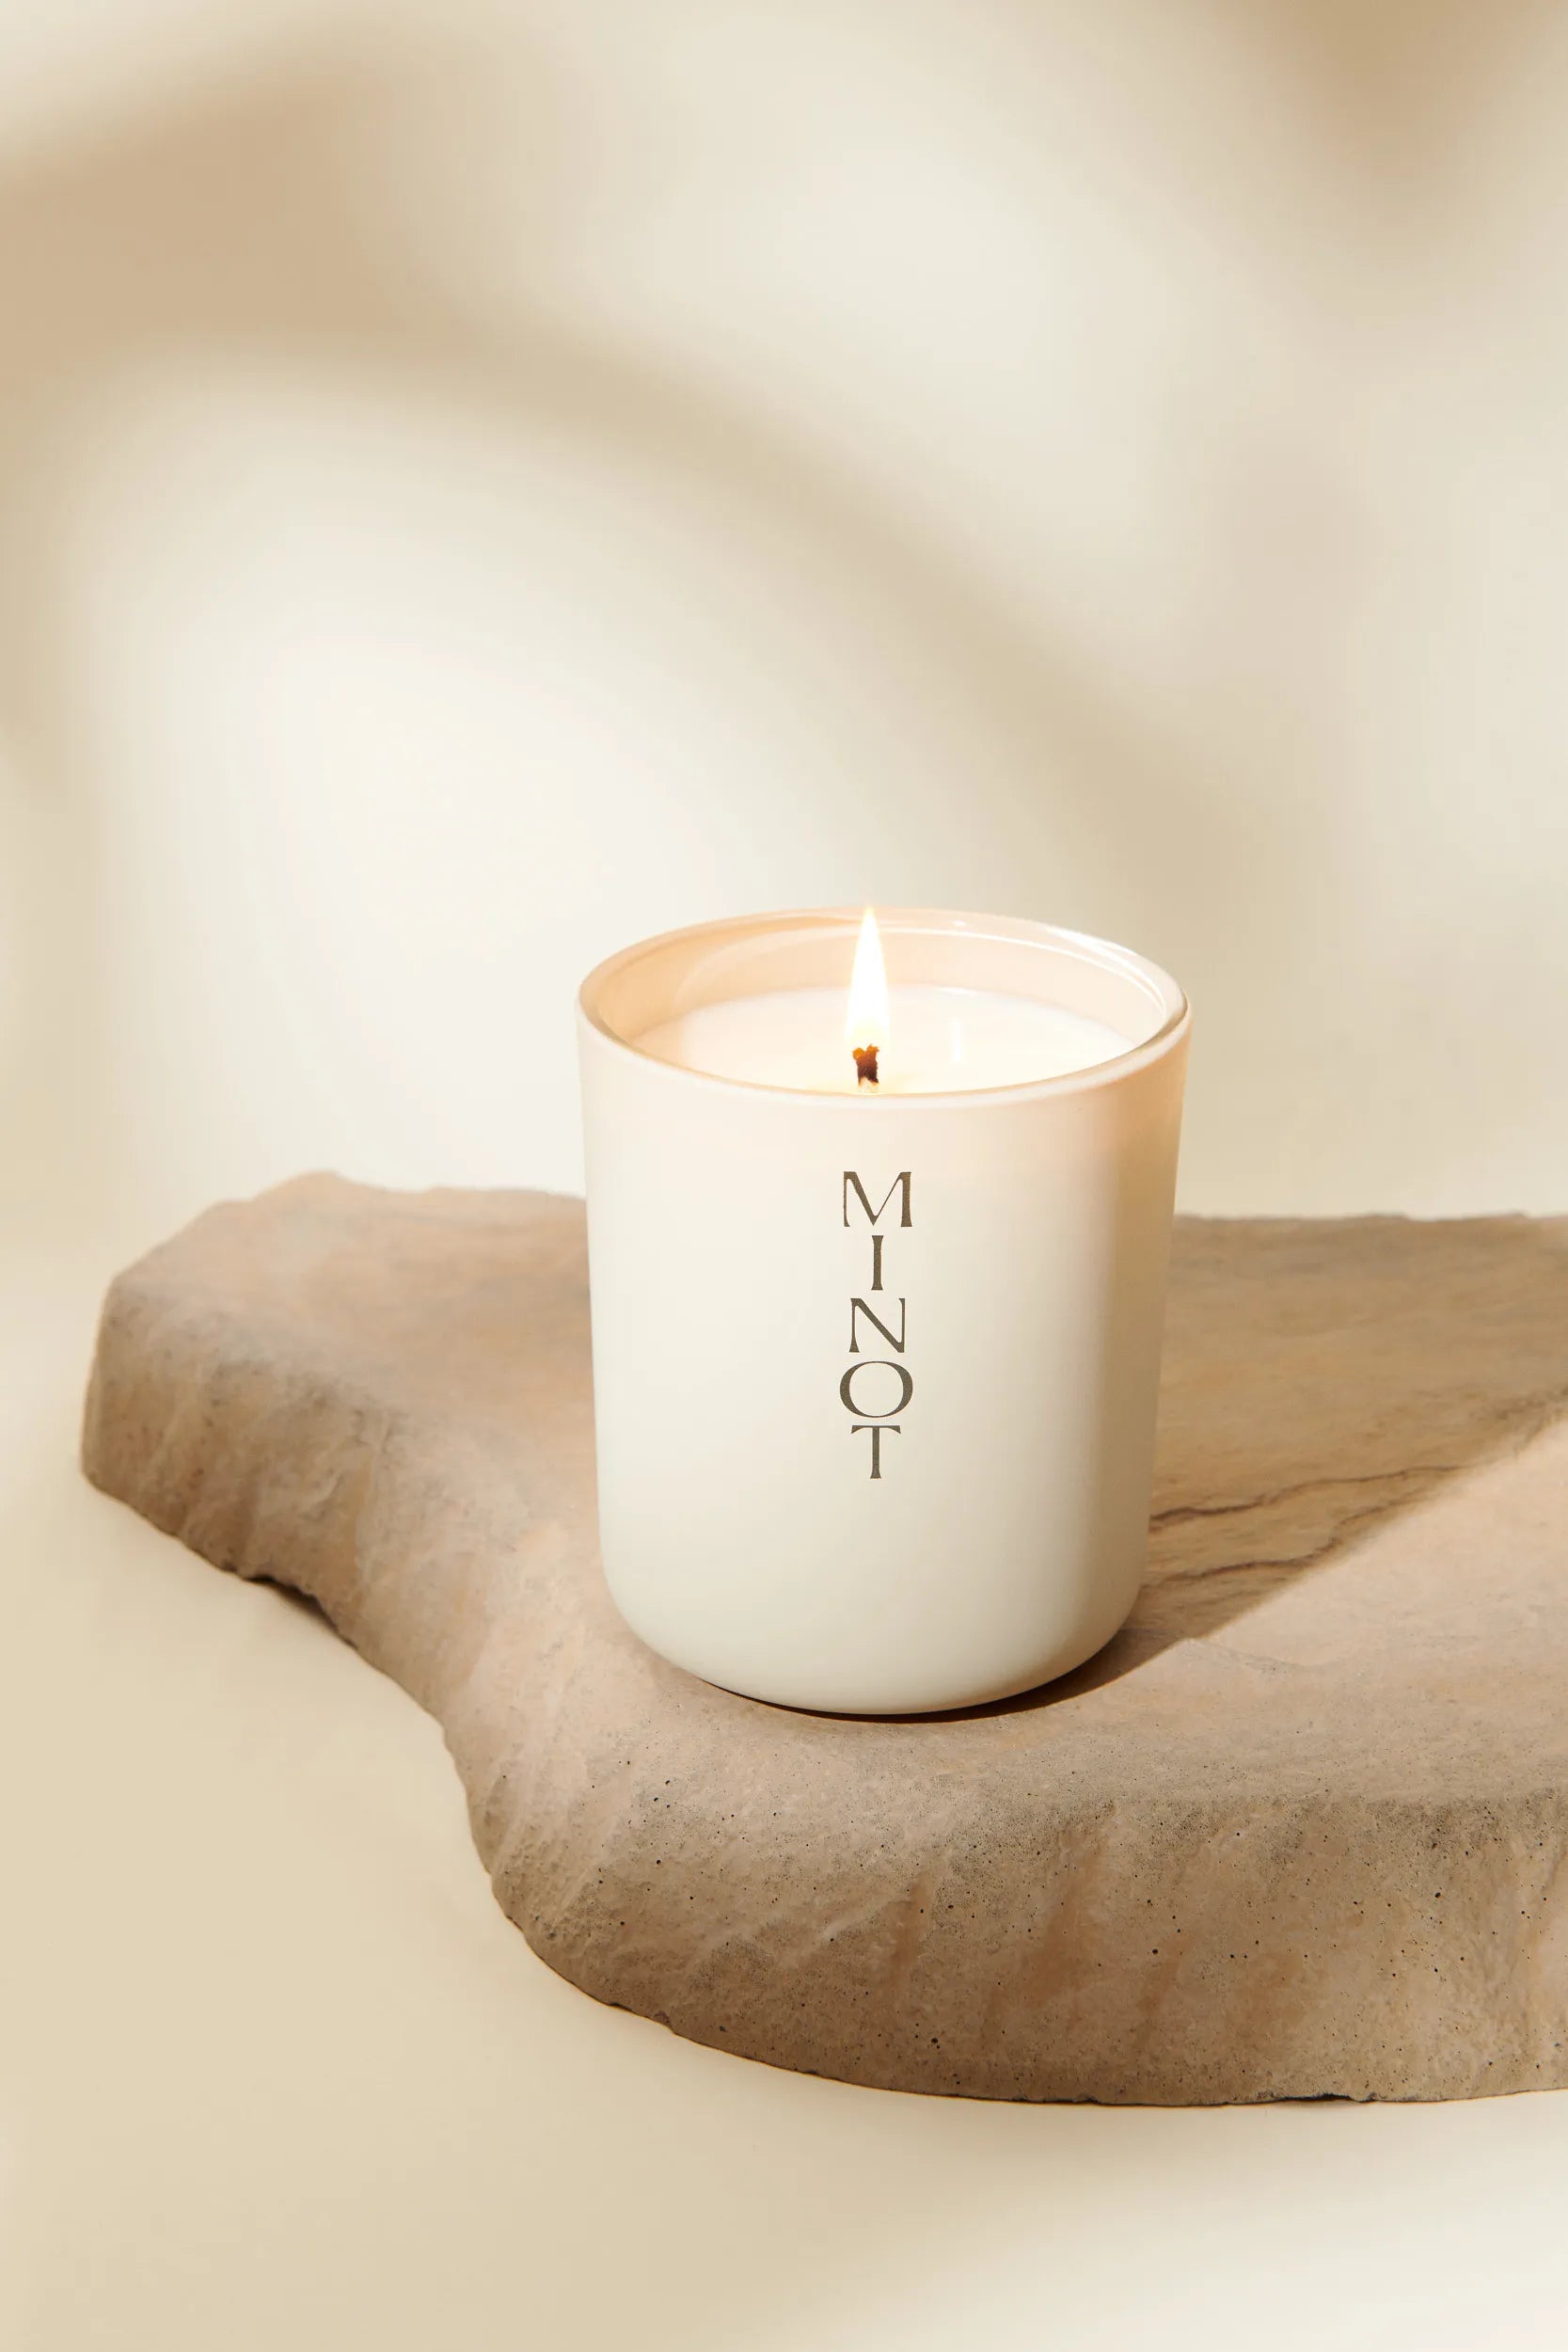 Wild Meadow is a clean-burning, non-toxic candle with floral notes of lilac, honeysuckle, and amyris